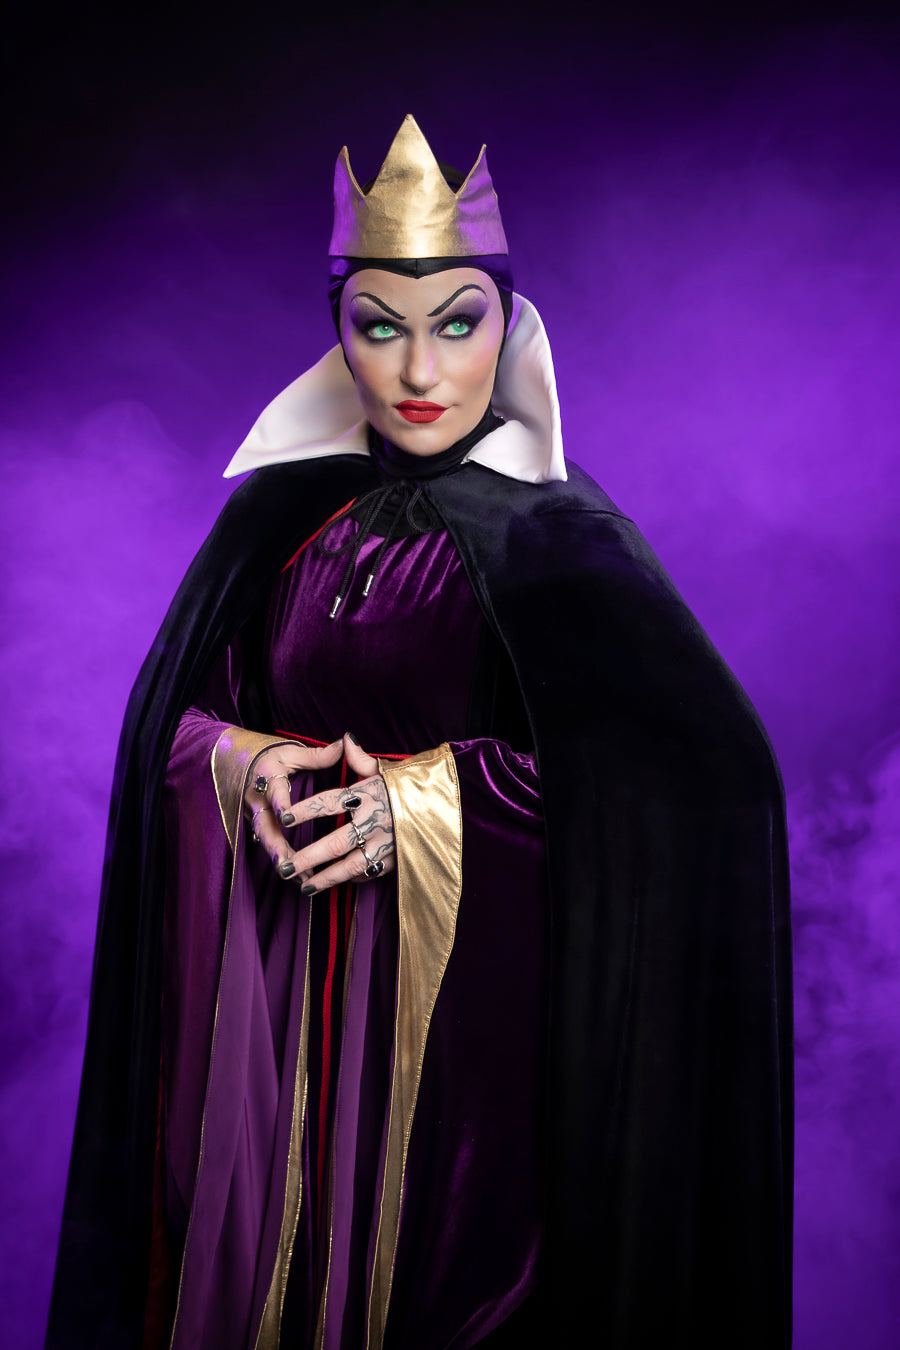 Snow White Evil Queen, Disney Villain Costume Hire or Cosplay, plus Makeup and Photography. Proudly by and available at, Little Shop of Horrors Costumery 6/1 Watt Rd Mornington & Melbourne